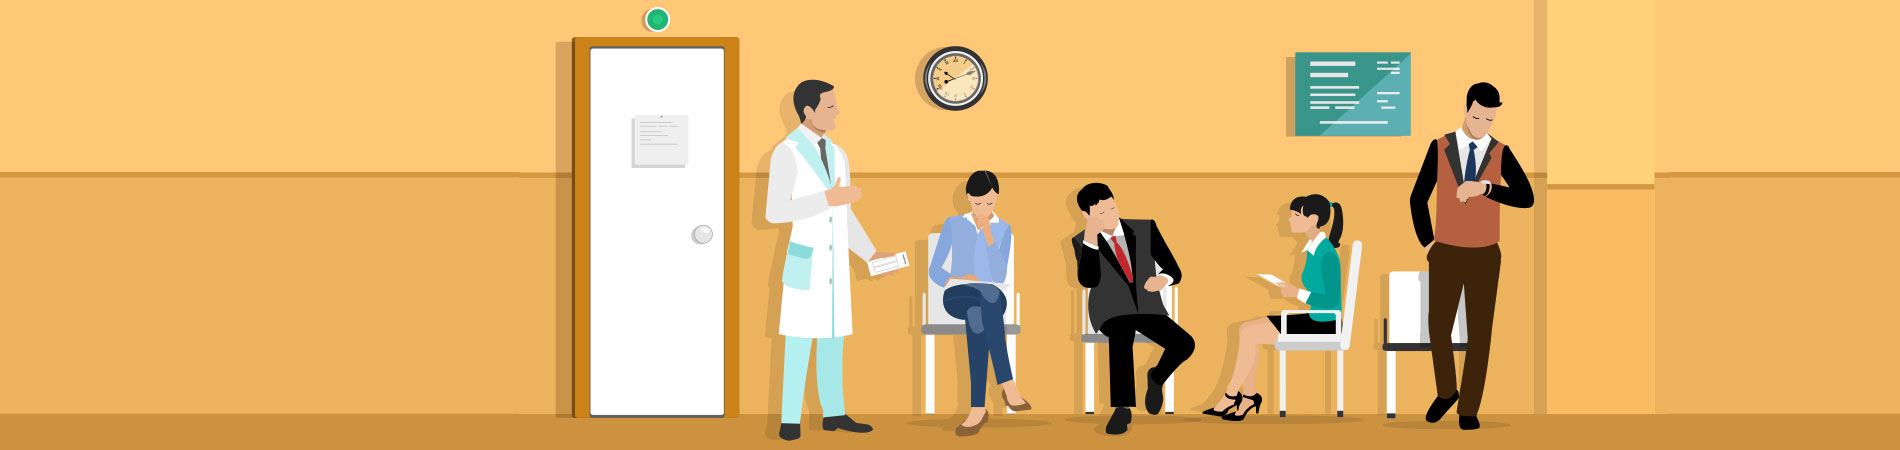 patient engagement in the waiting room at a clinic